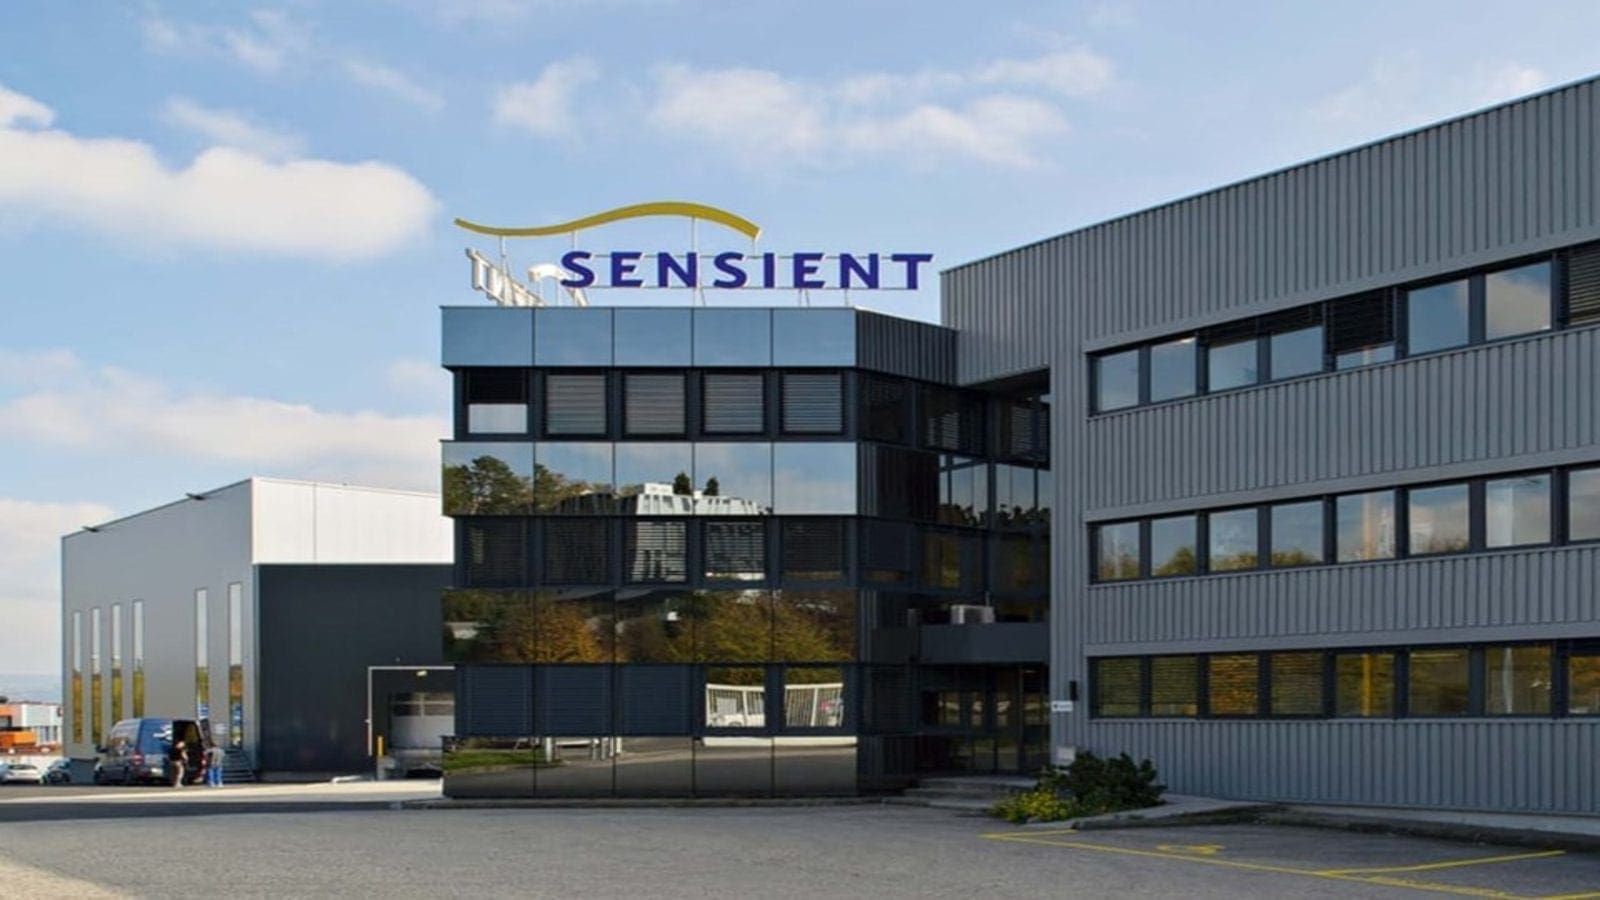 Sensient Technologies strengthens technical solution capabilities with acquisition of Flavor Solutions